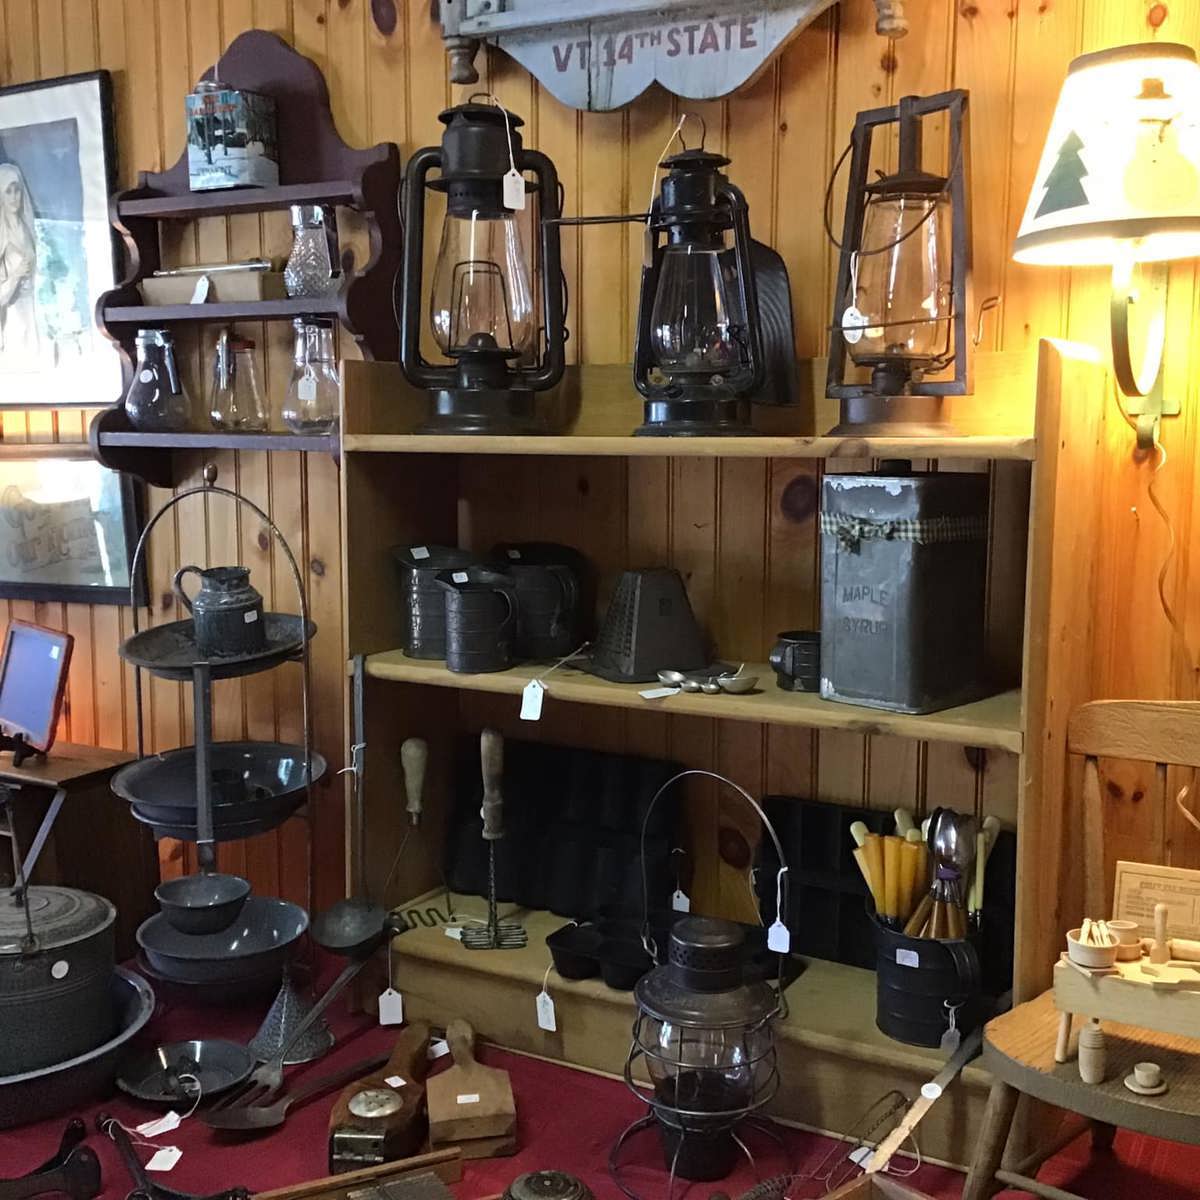 Personal Touch Antiques and Collectibles